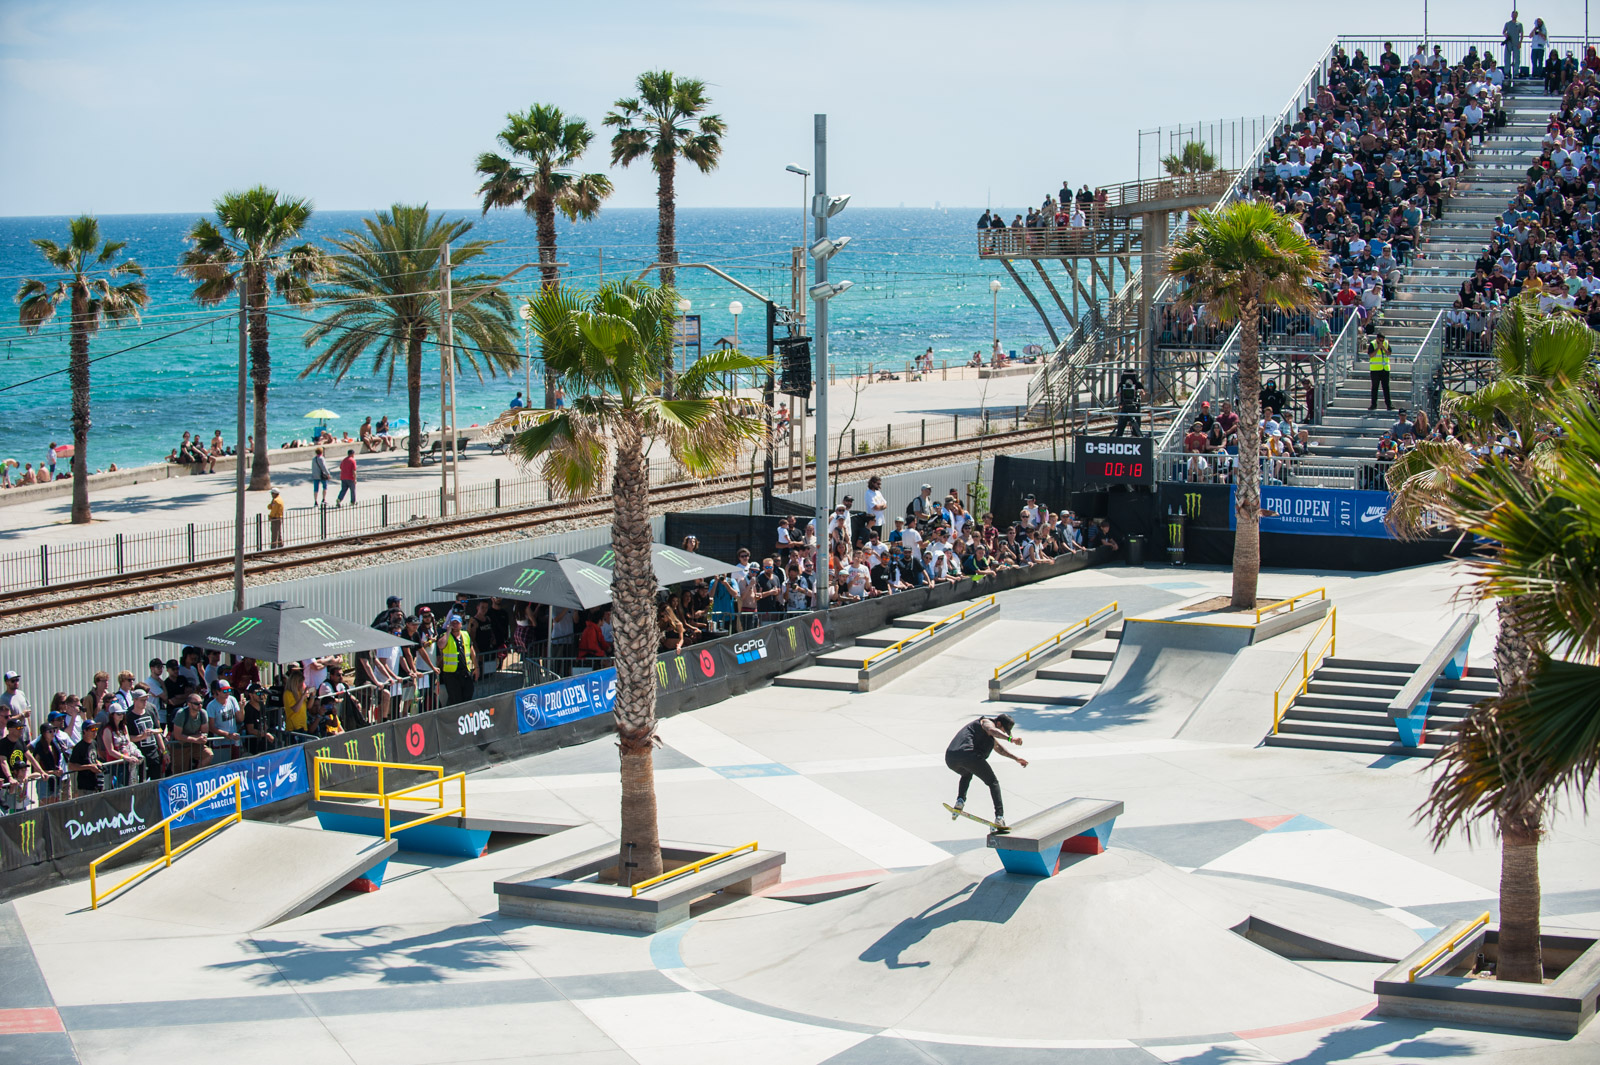 Monster Energy’s Nyjah Huston Takes 1st Place at the SLS Nike SB Pro Open in Barcelona